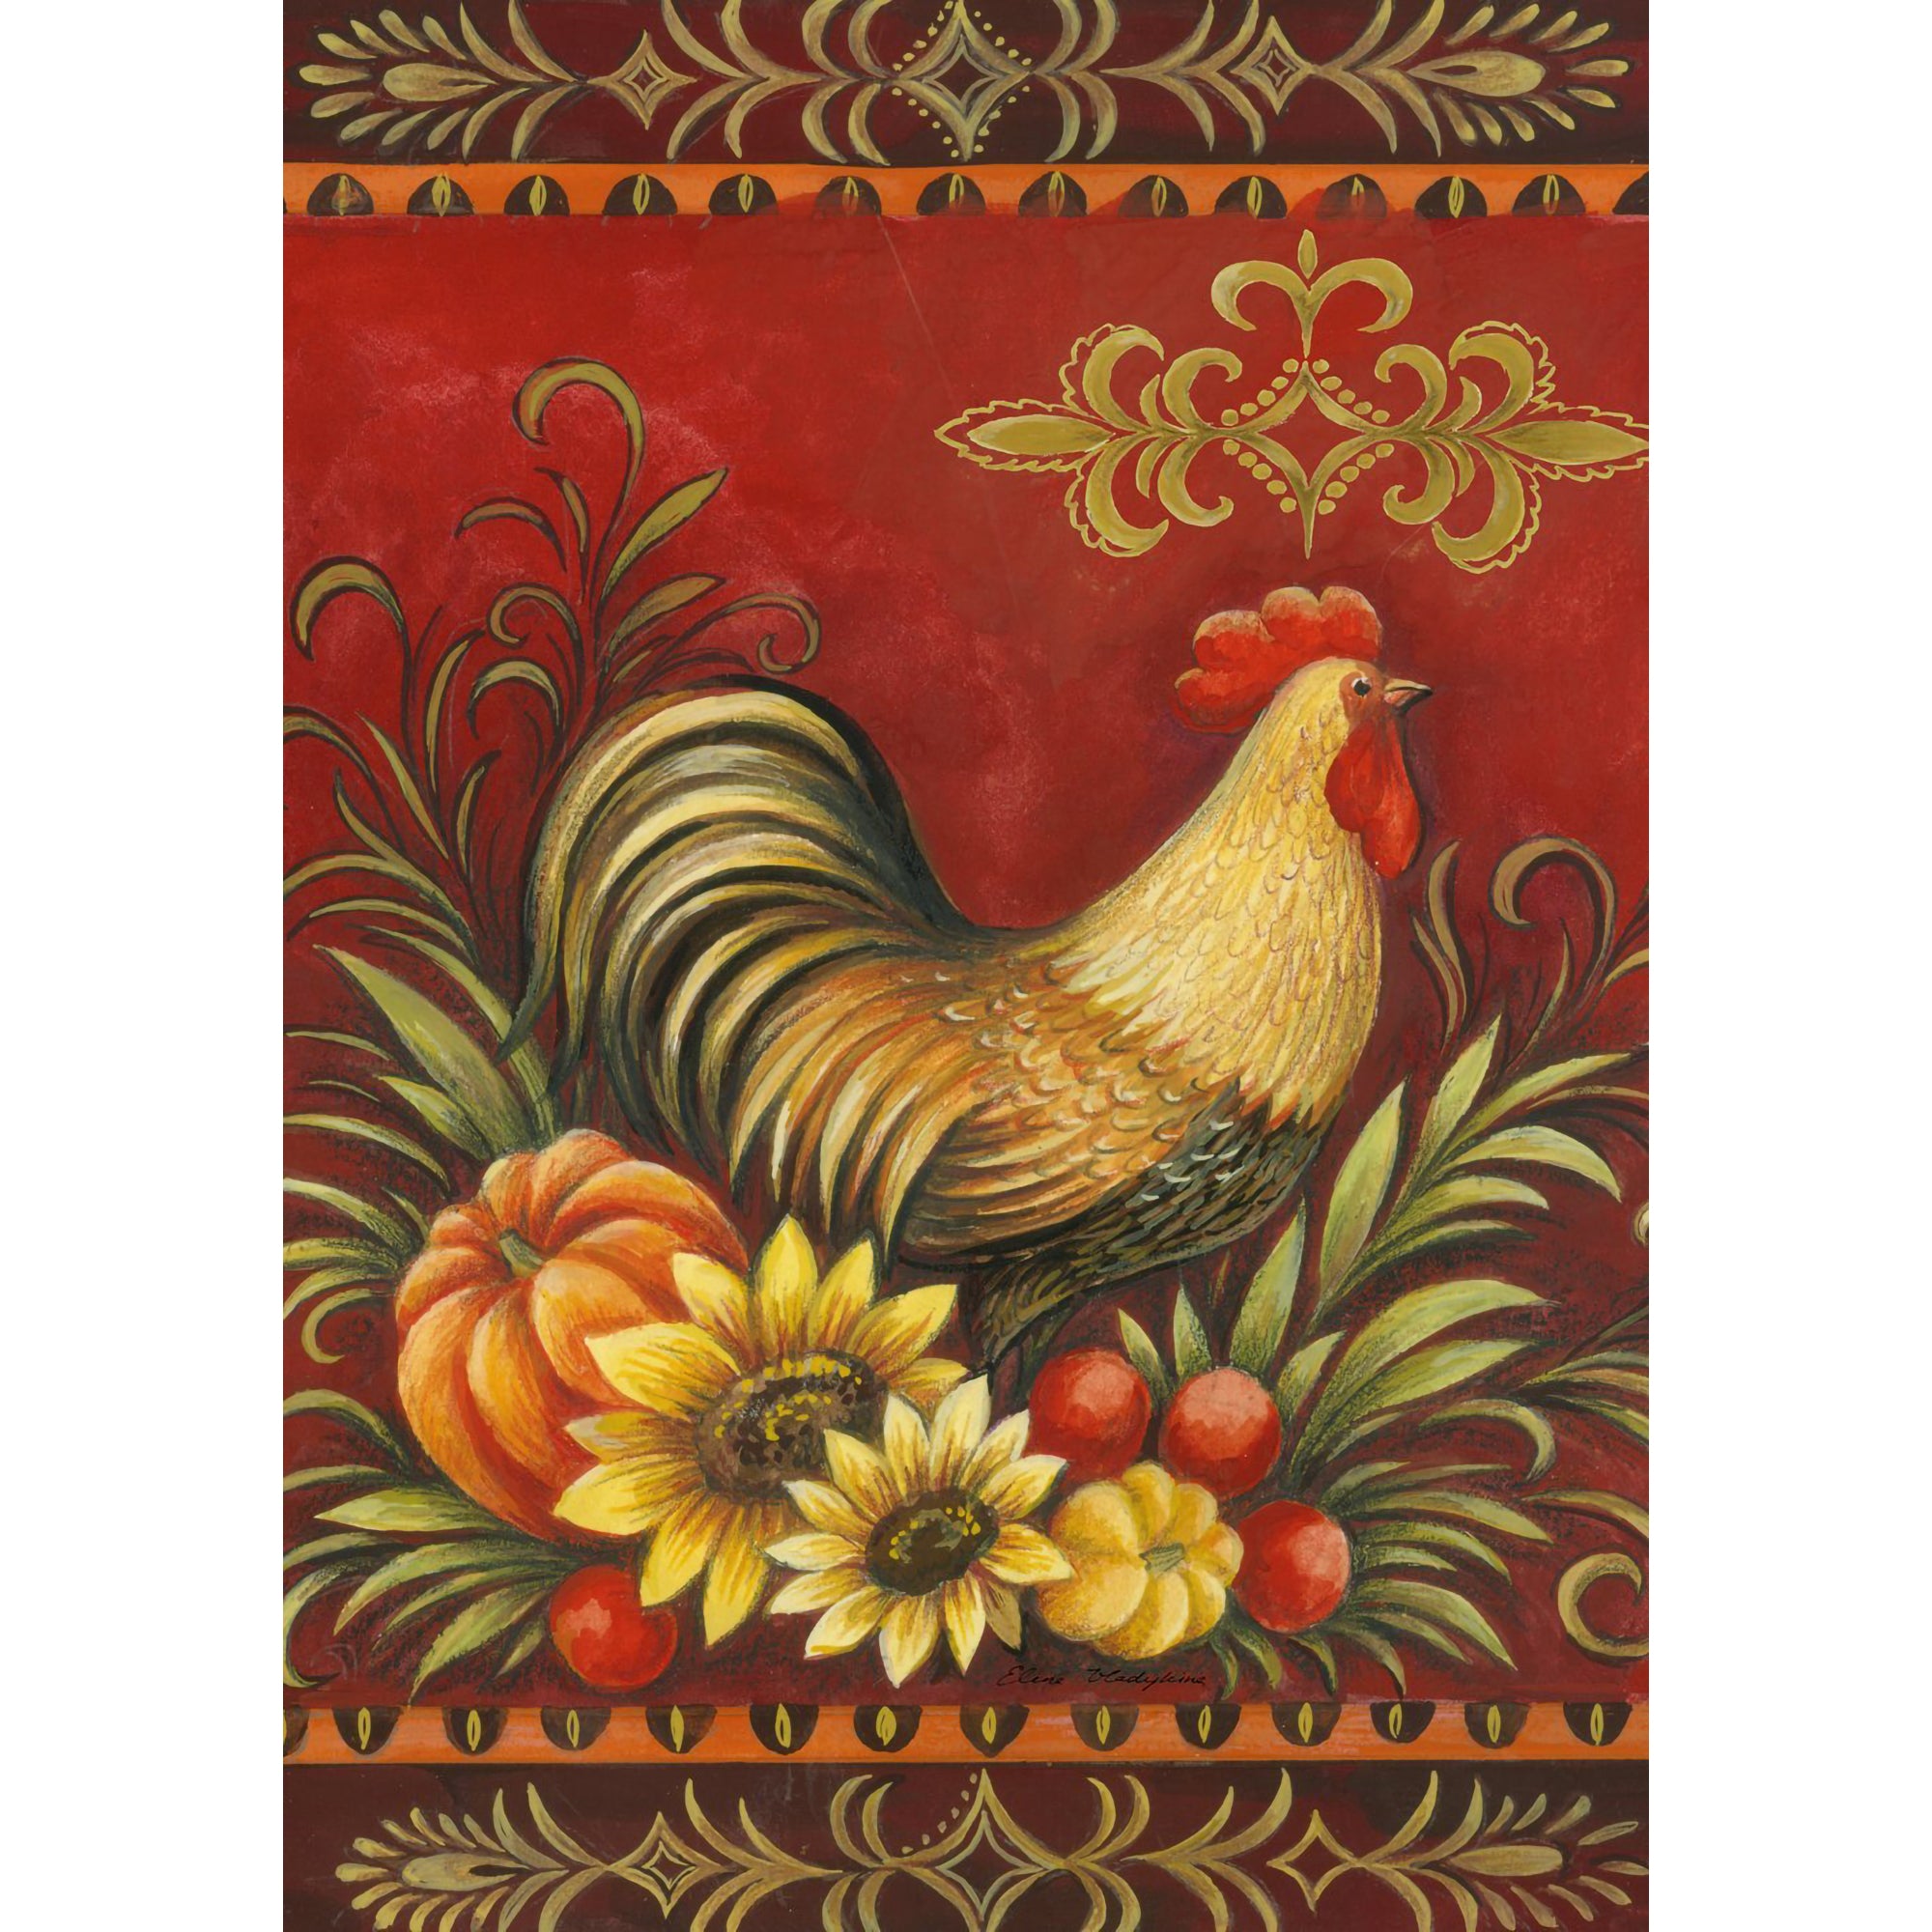 Toland Fall Rooster Garden Flag